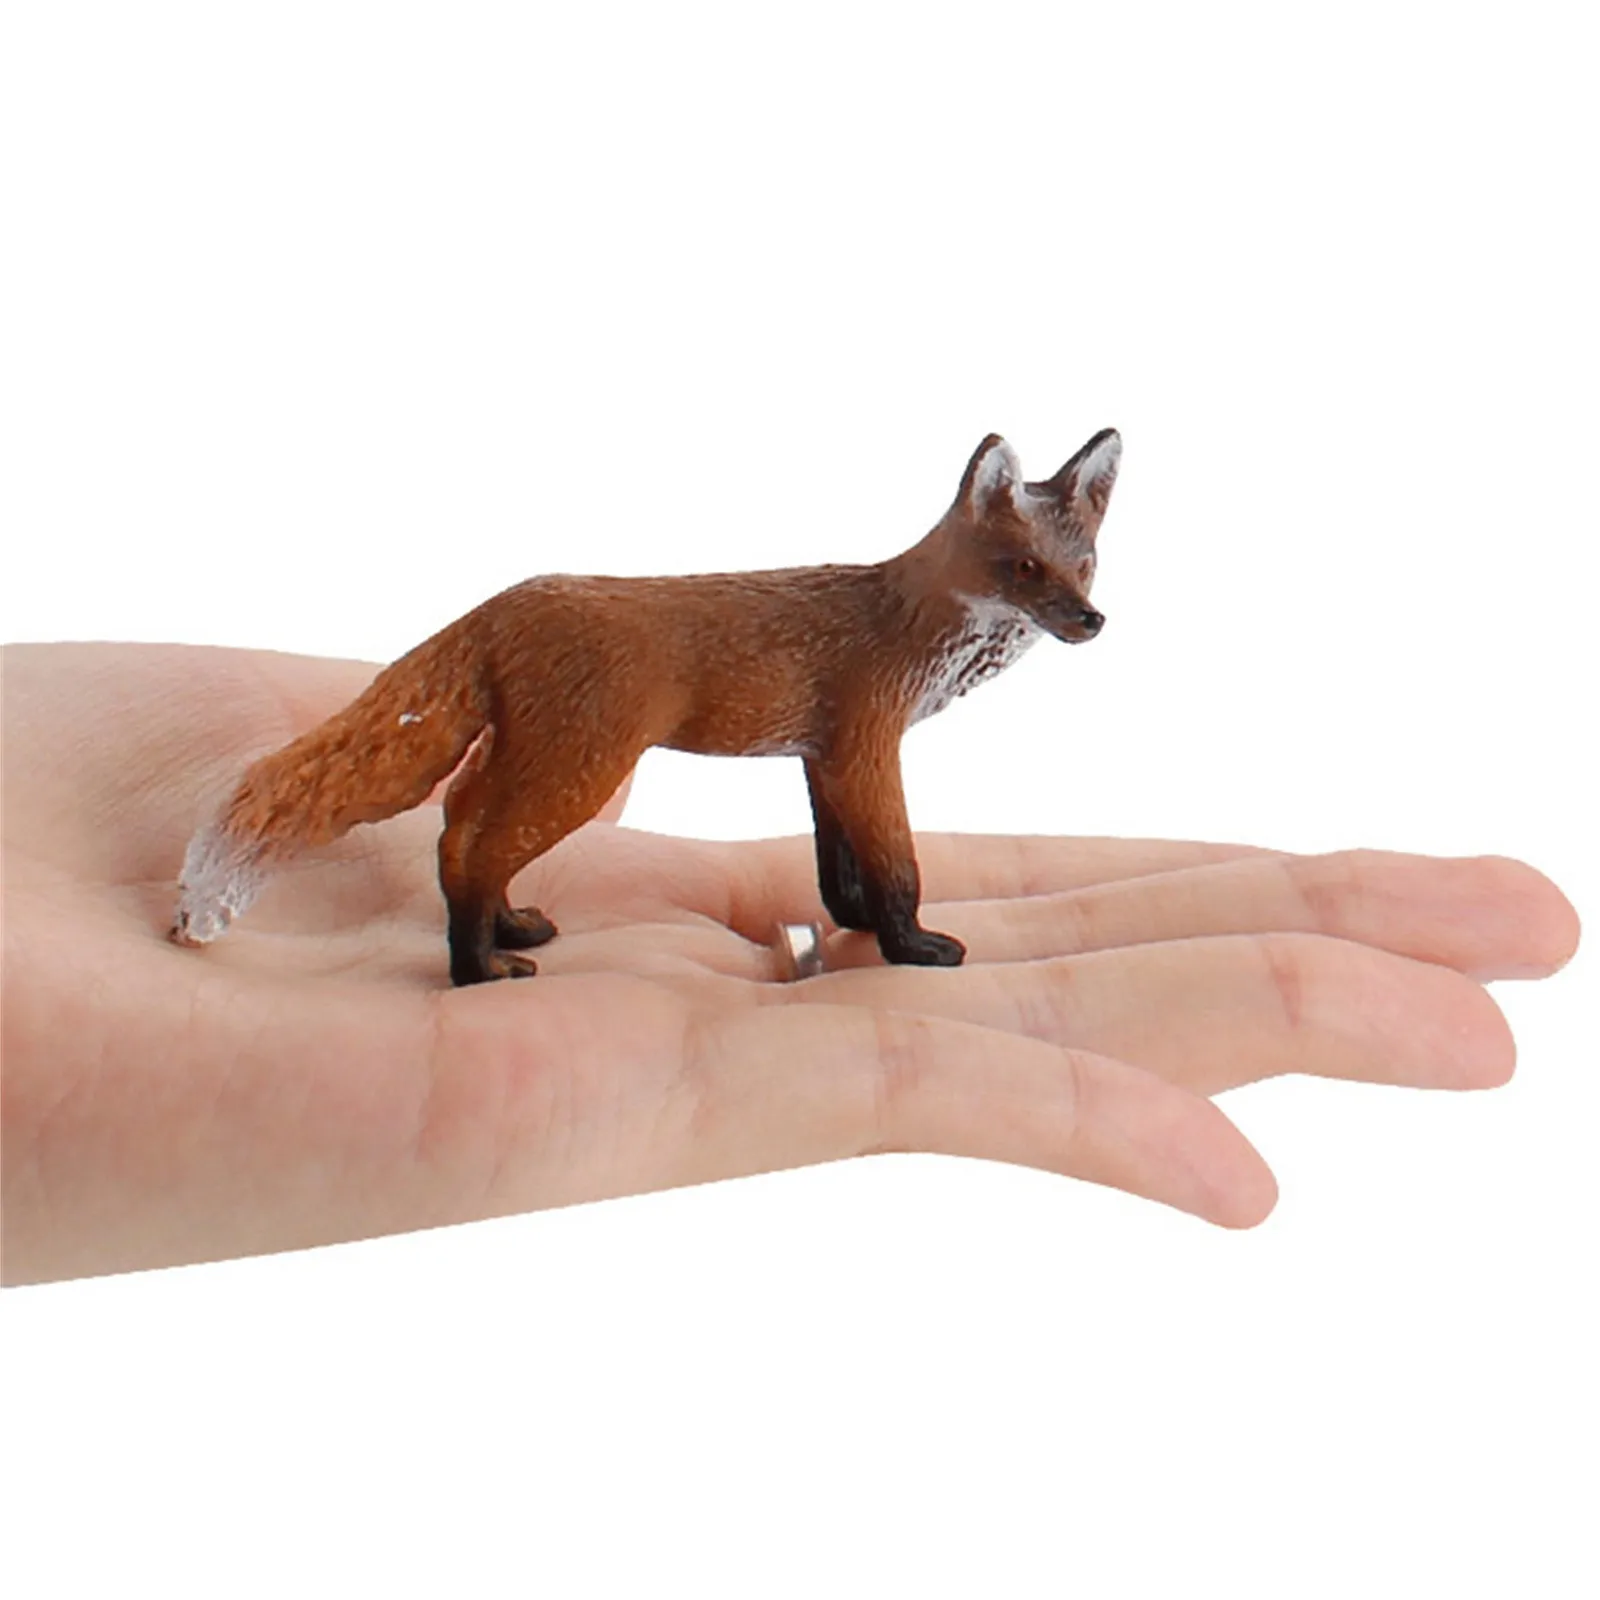 

New Forest Wildlife Animals Fox Simulation Animal Figurine Red Fox Action Figure PVC Miniature Educational Model Toy Kids Gifts